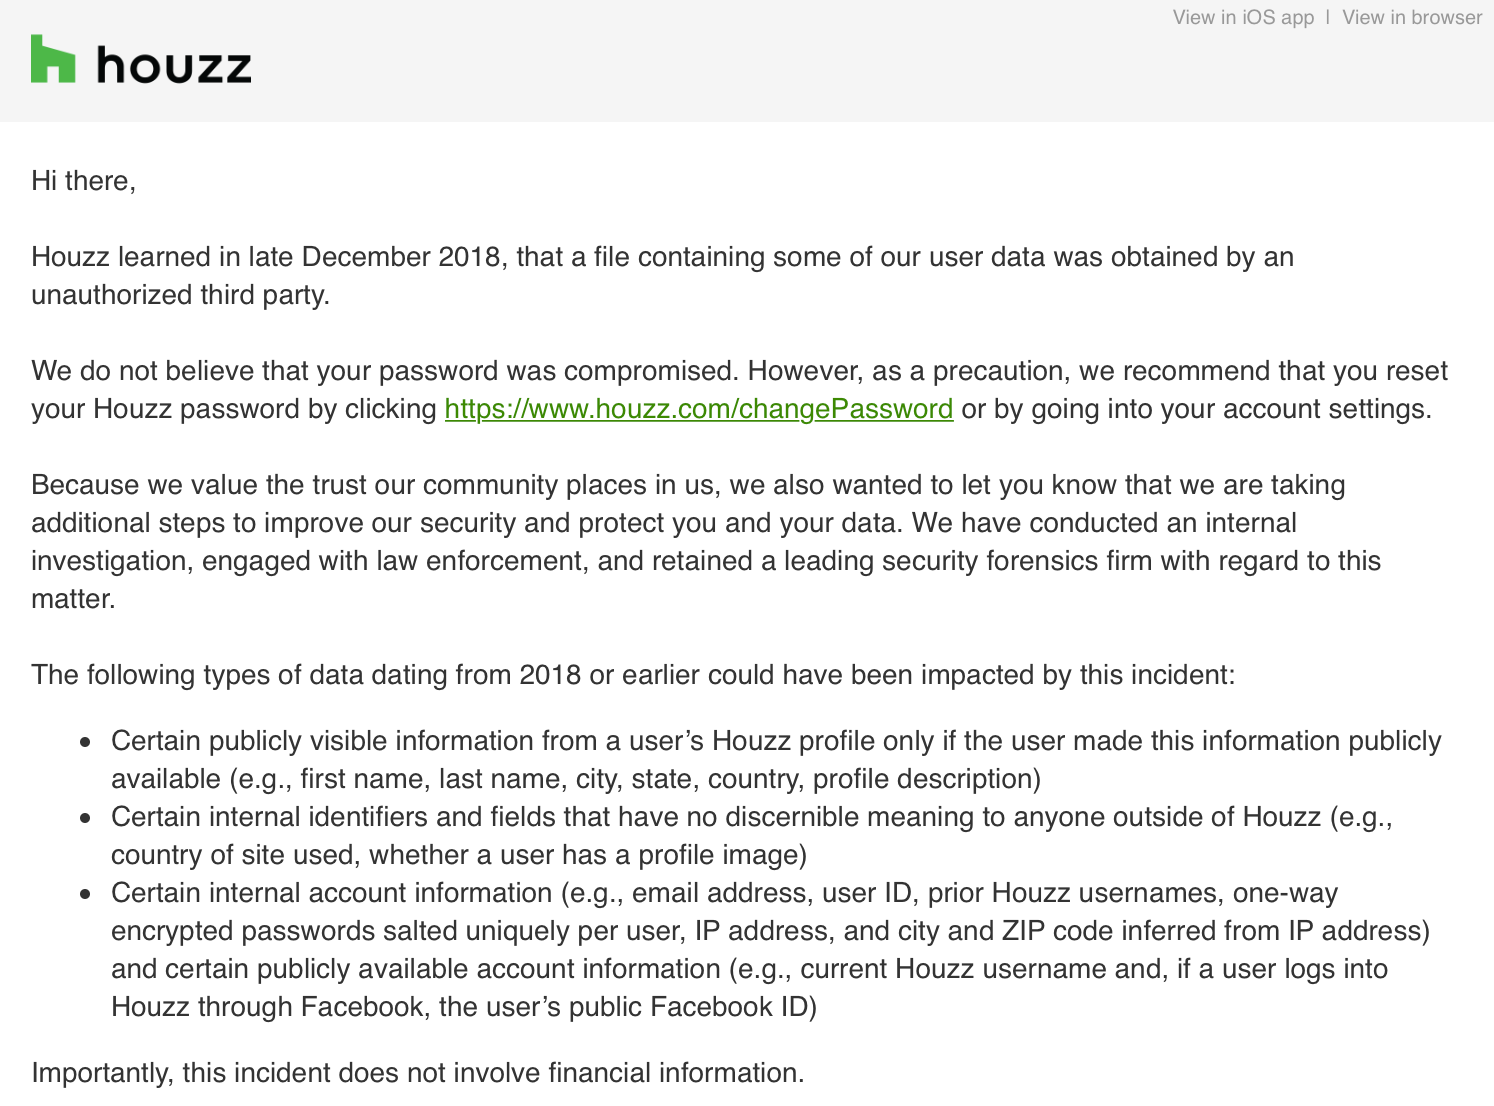 Houzz Requests Users Reset Their Passwords After Data Breach